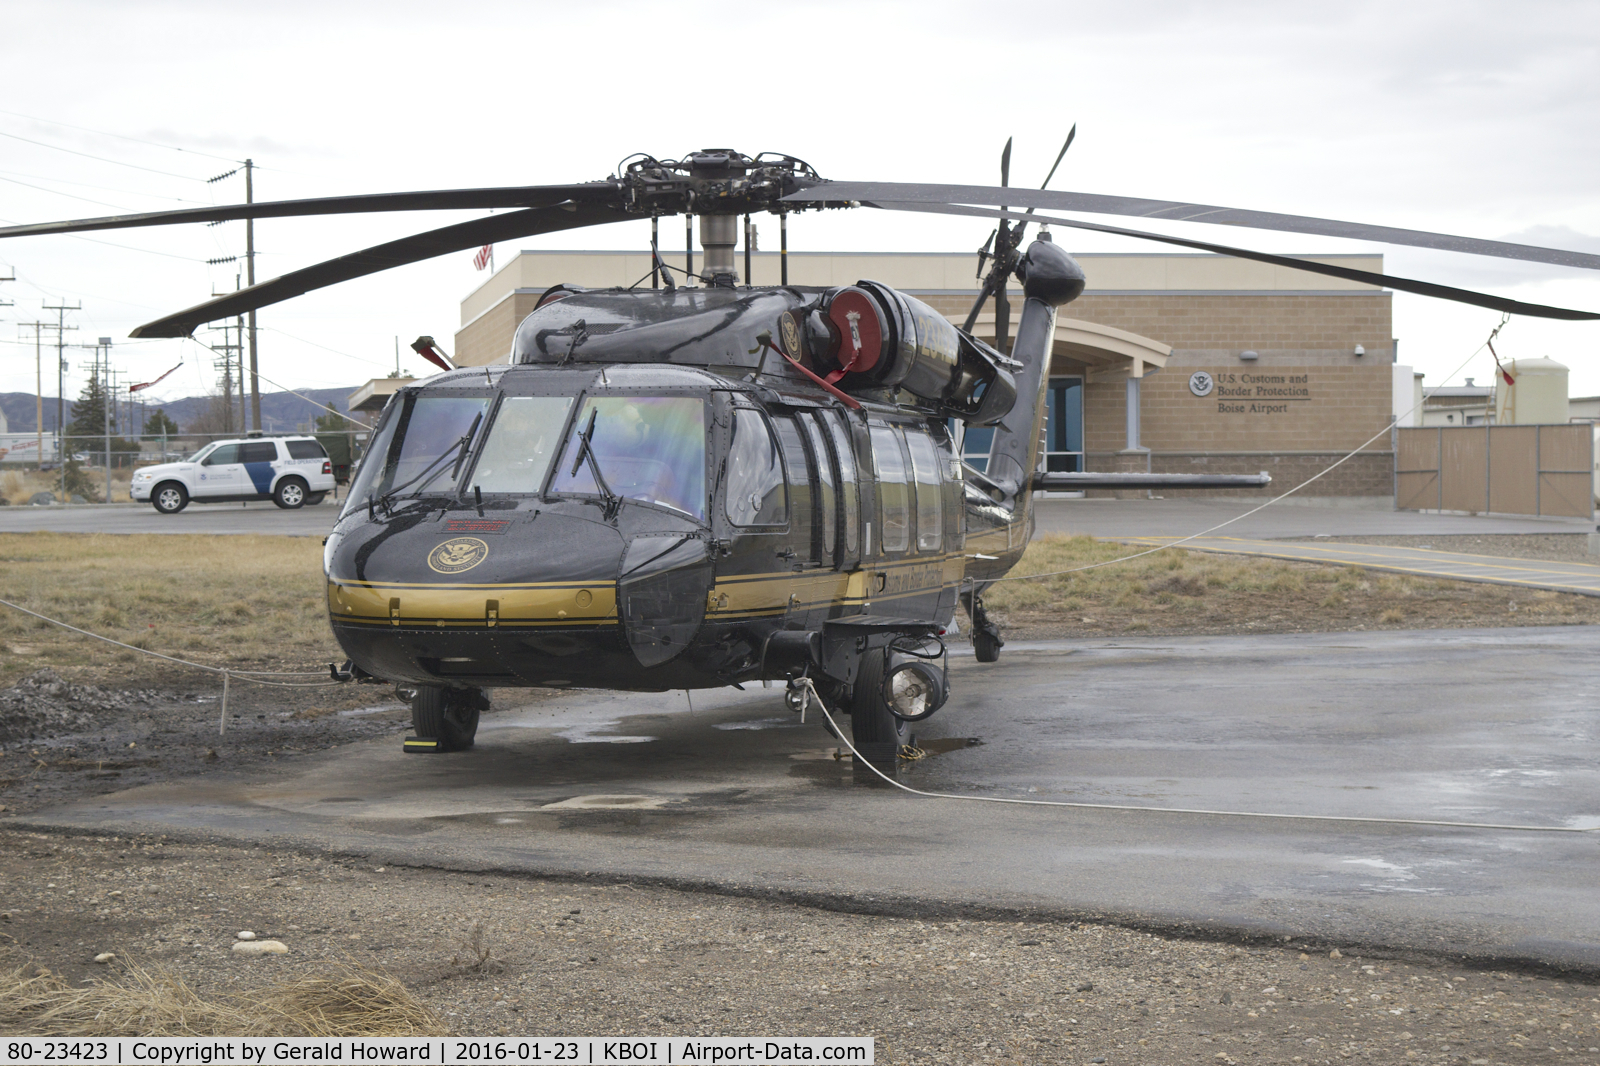 80-23423, Sikorsky UH-60A Black Hawk C/N 70.181, U.S. Customs involved in search of missing persons in Idaho back country.